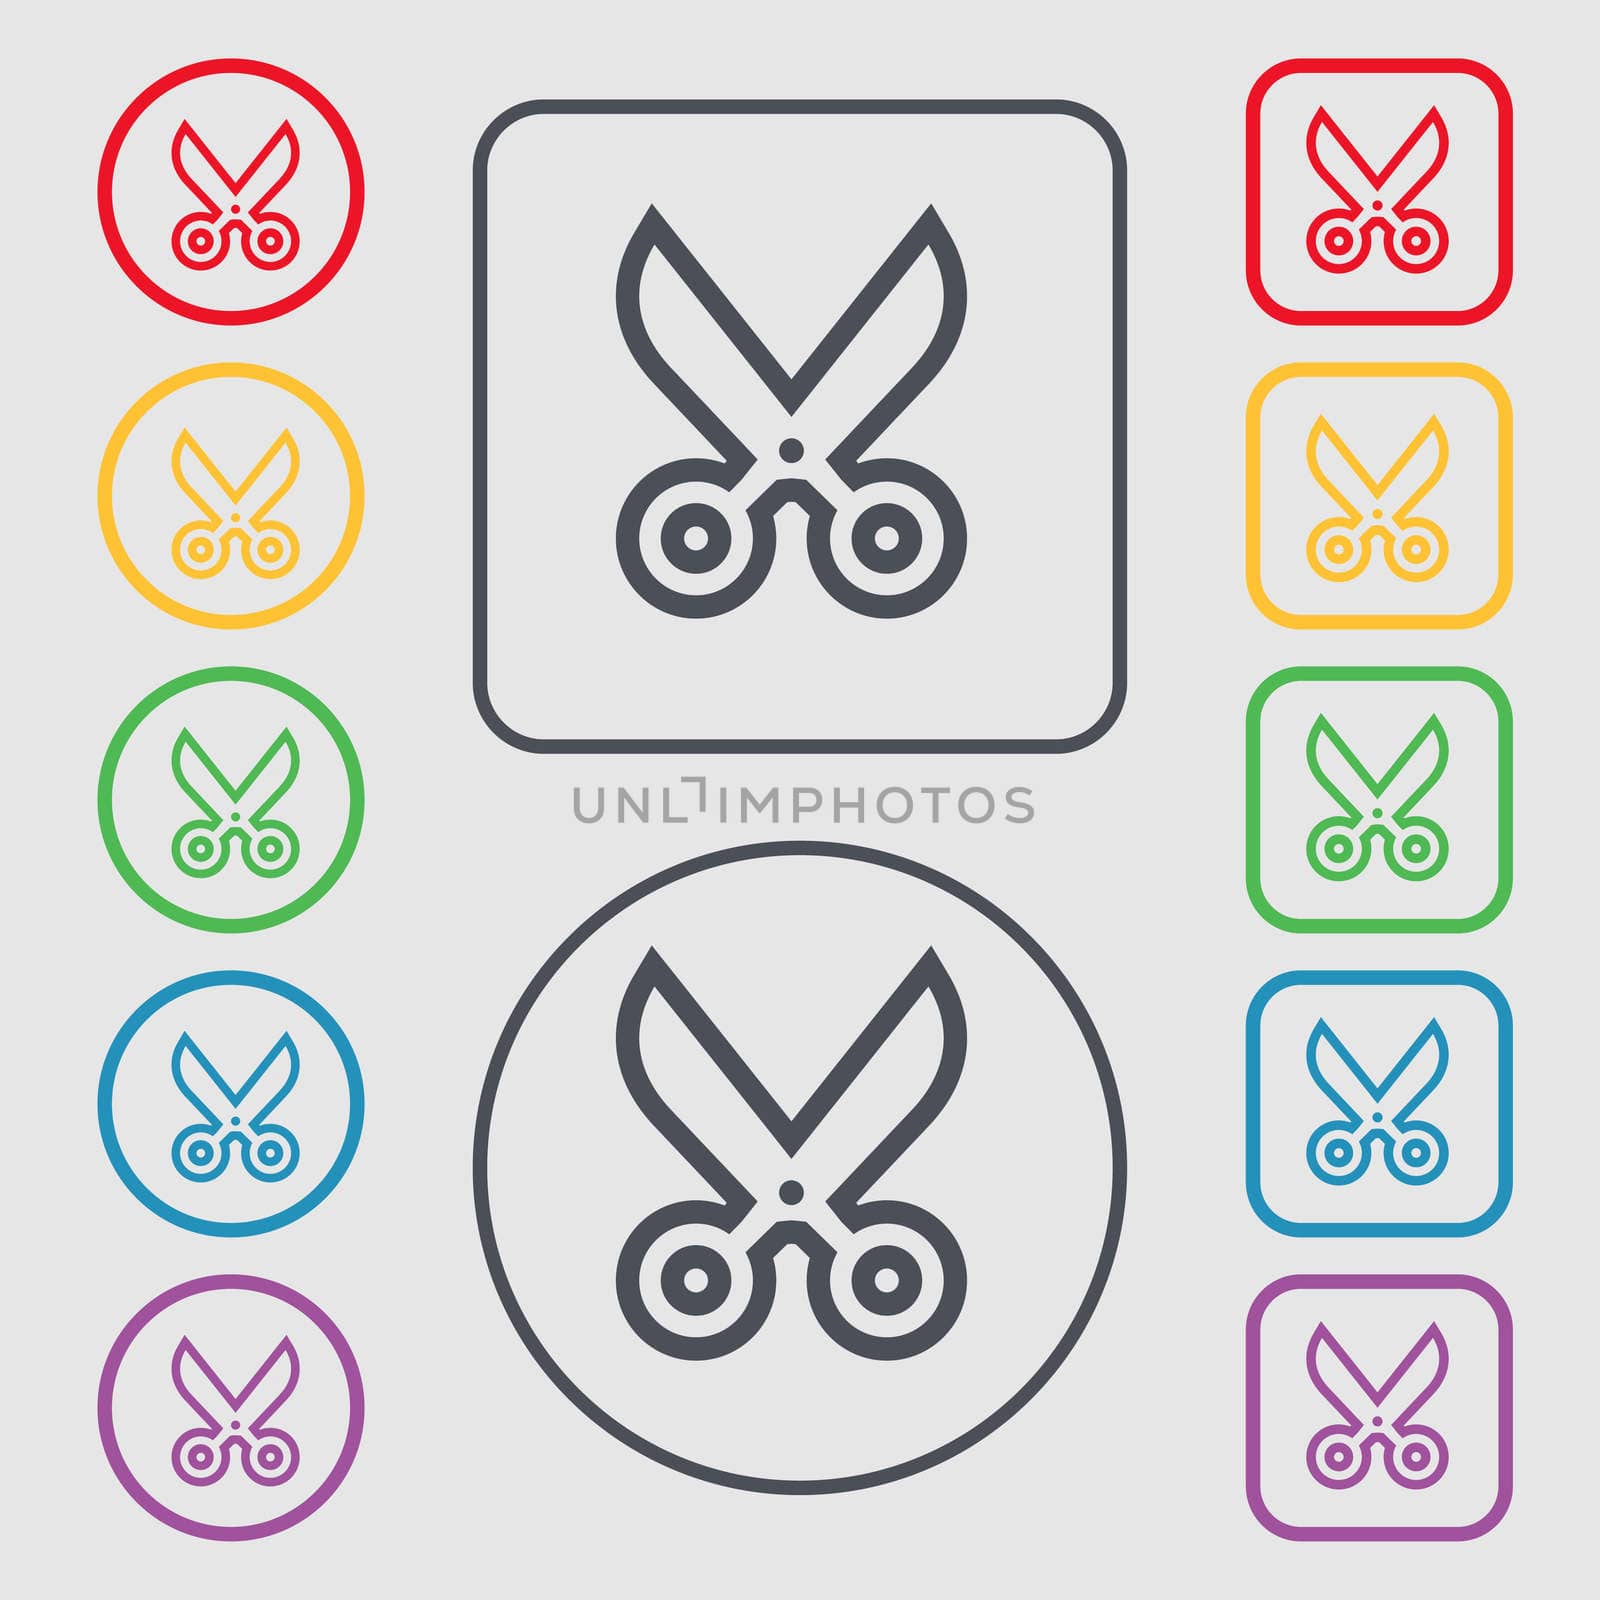 scissors icon sign. symbol on the Round and square buttons with frame. illustration